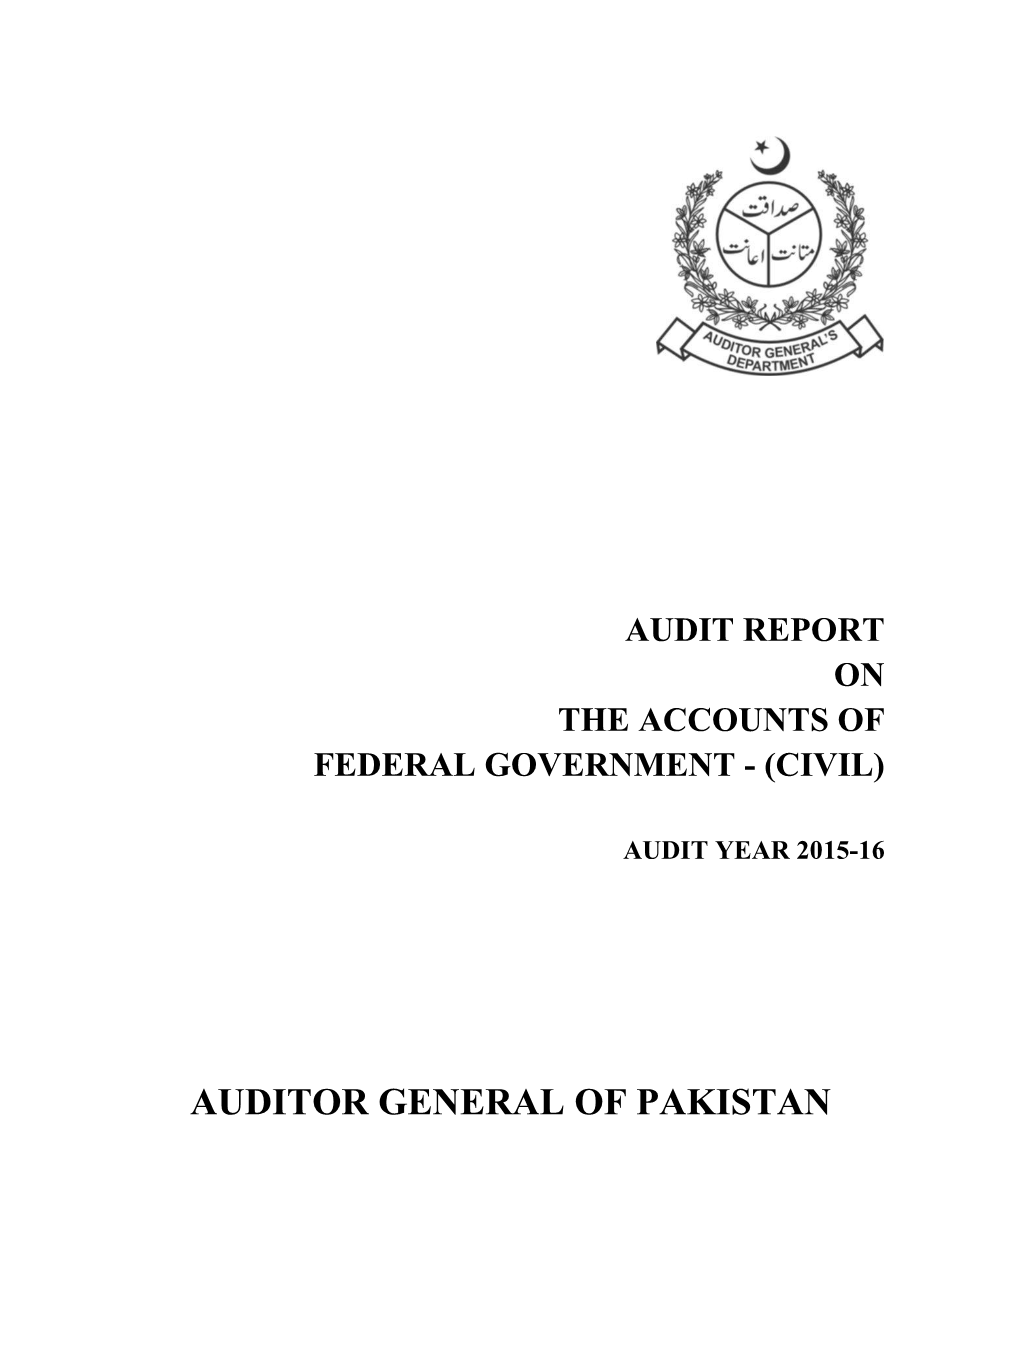 Audit Report on the Accounts of Federal Government - (Civil)